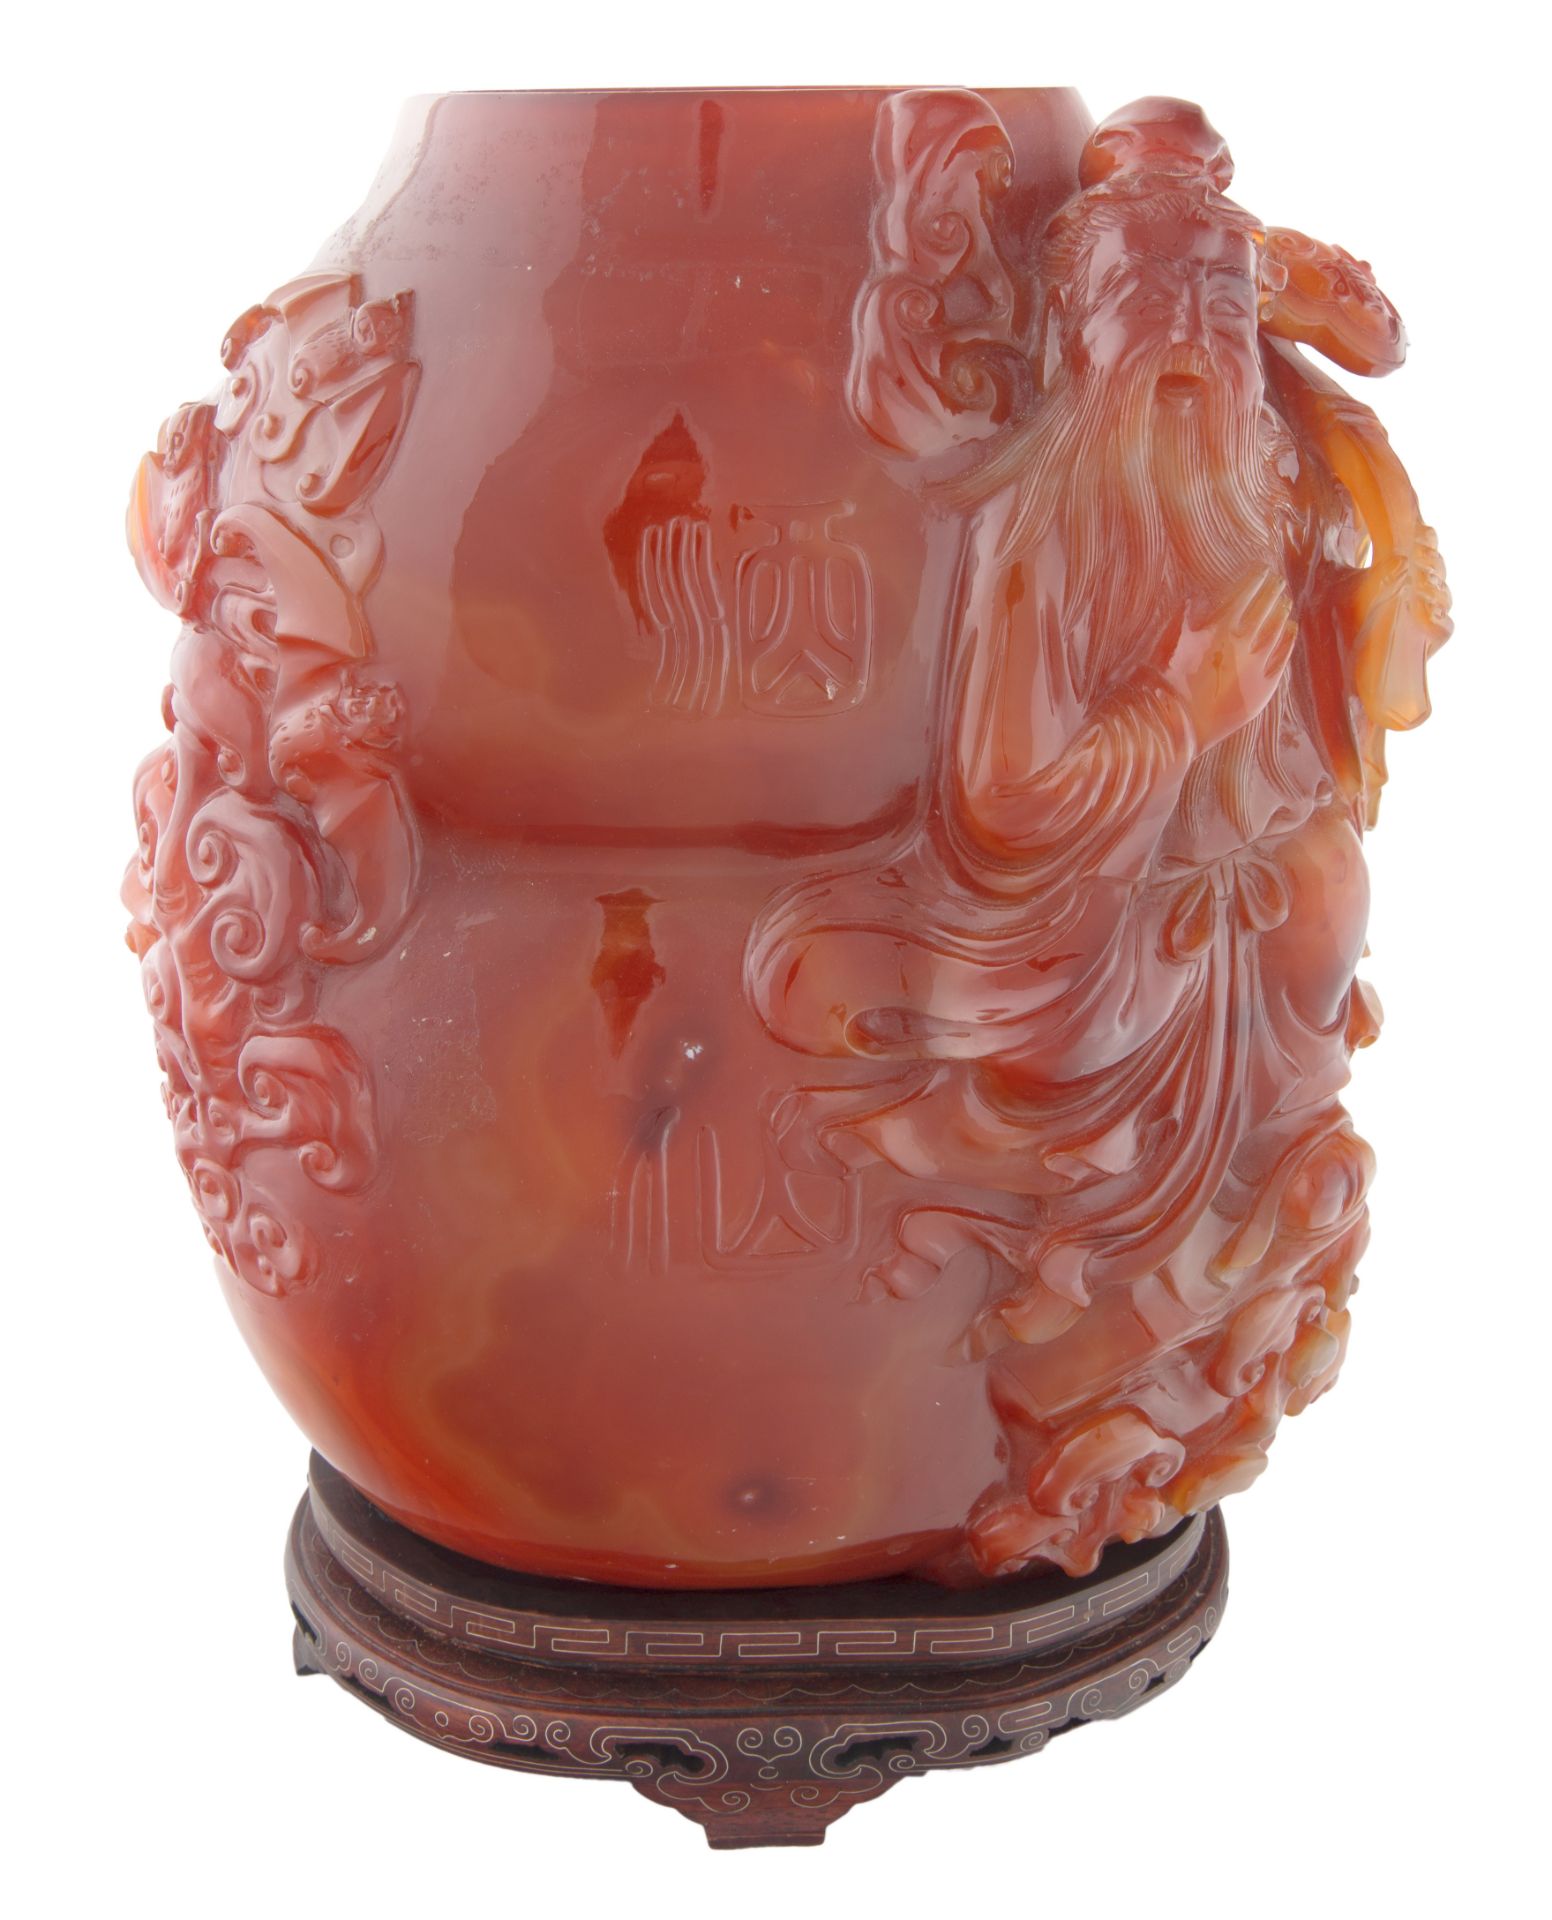 A FINE CHINESE CARNELIAN AGATE VESSEL WITH COVER, QING DYNASTY, LATE 19TH CENTURY - Bild 5 aus 6